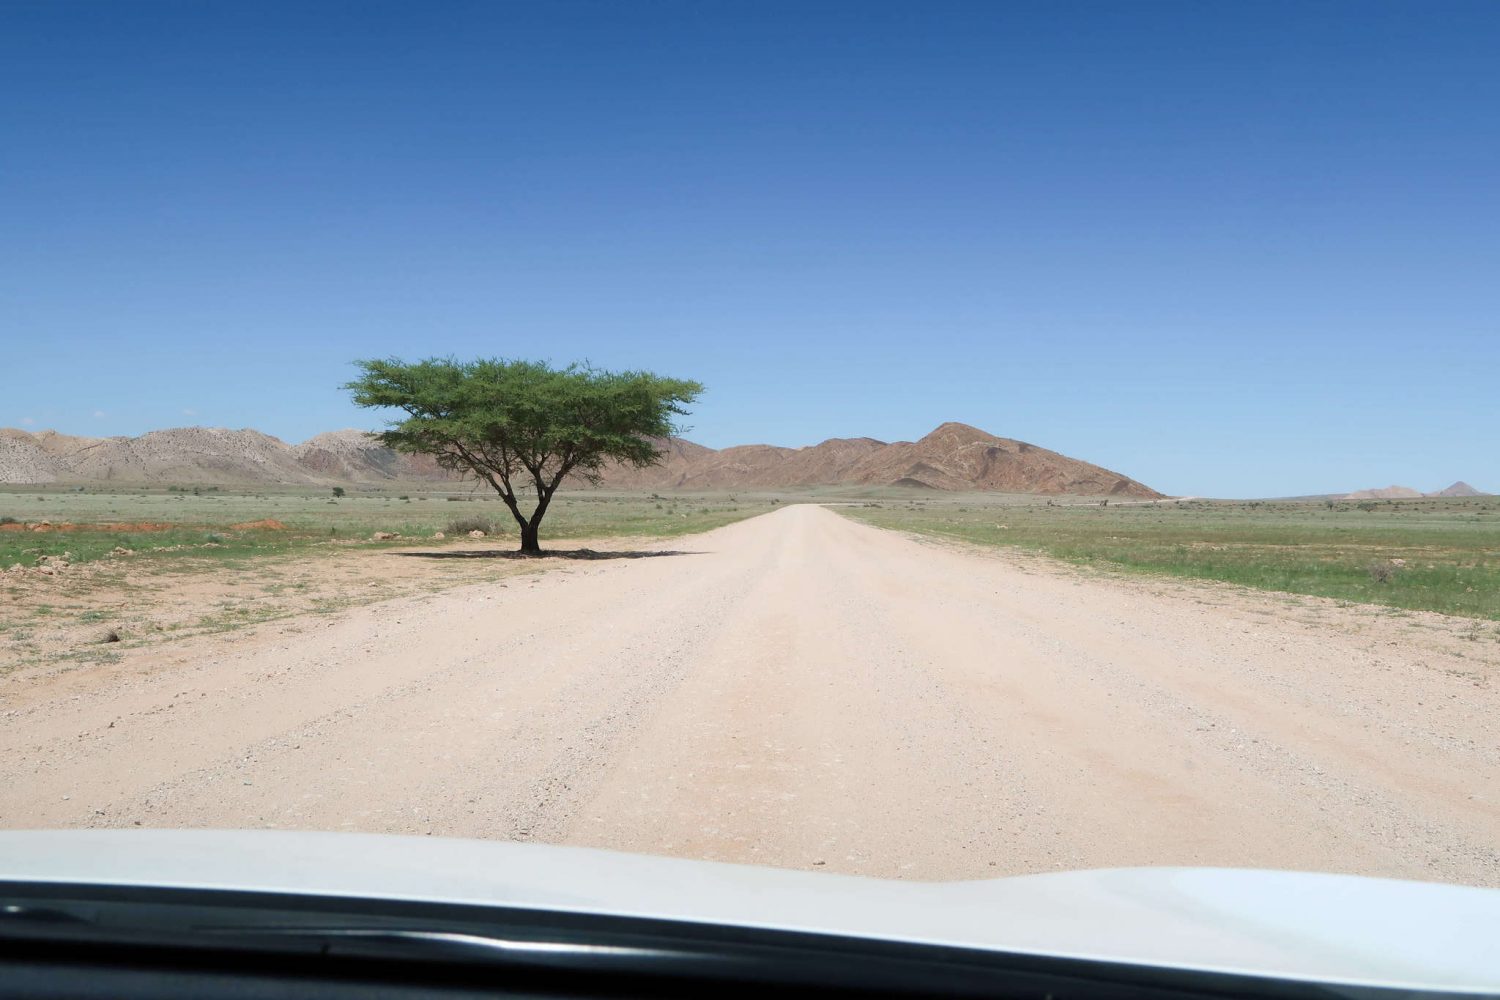 Driving in Namibia